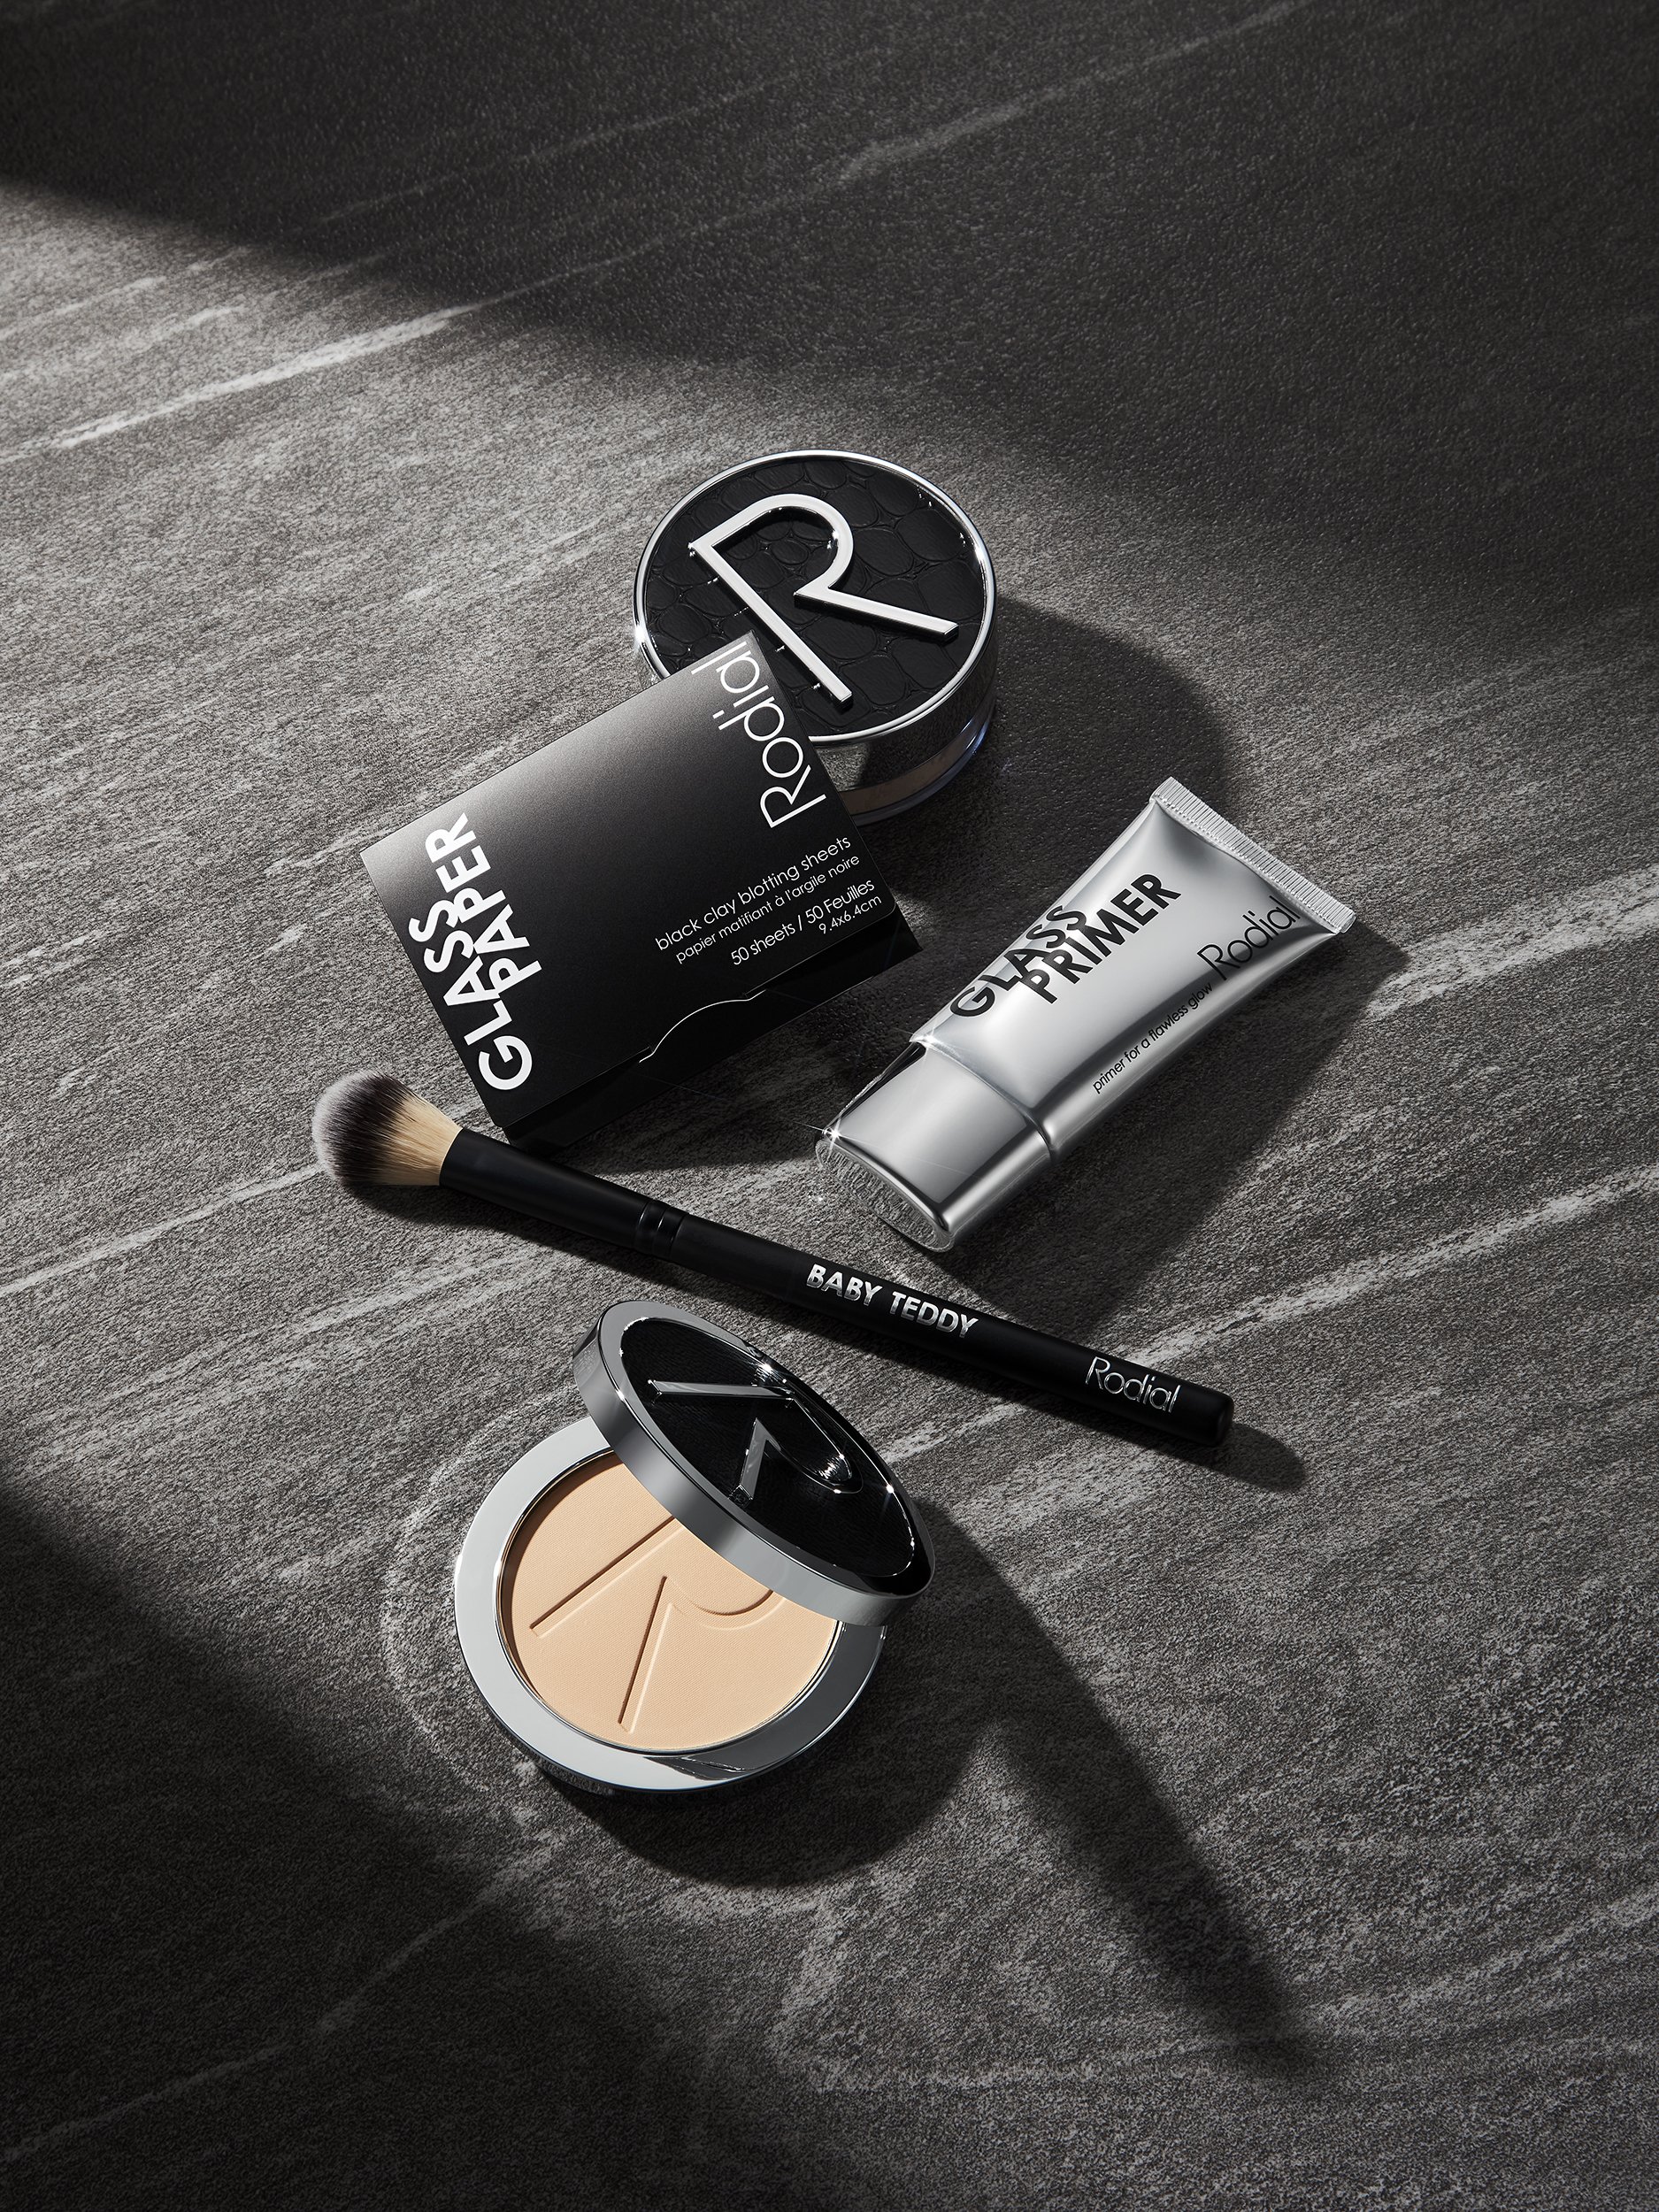 Rodial Glass Primer, Glass Paper, Glass Powder, Glass Pressed Powder &amp; Teddy Brush - Cosmetics photography by Simon Lyle Ritchie